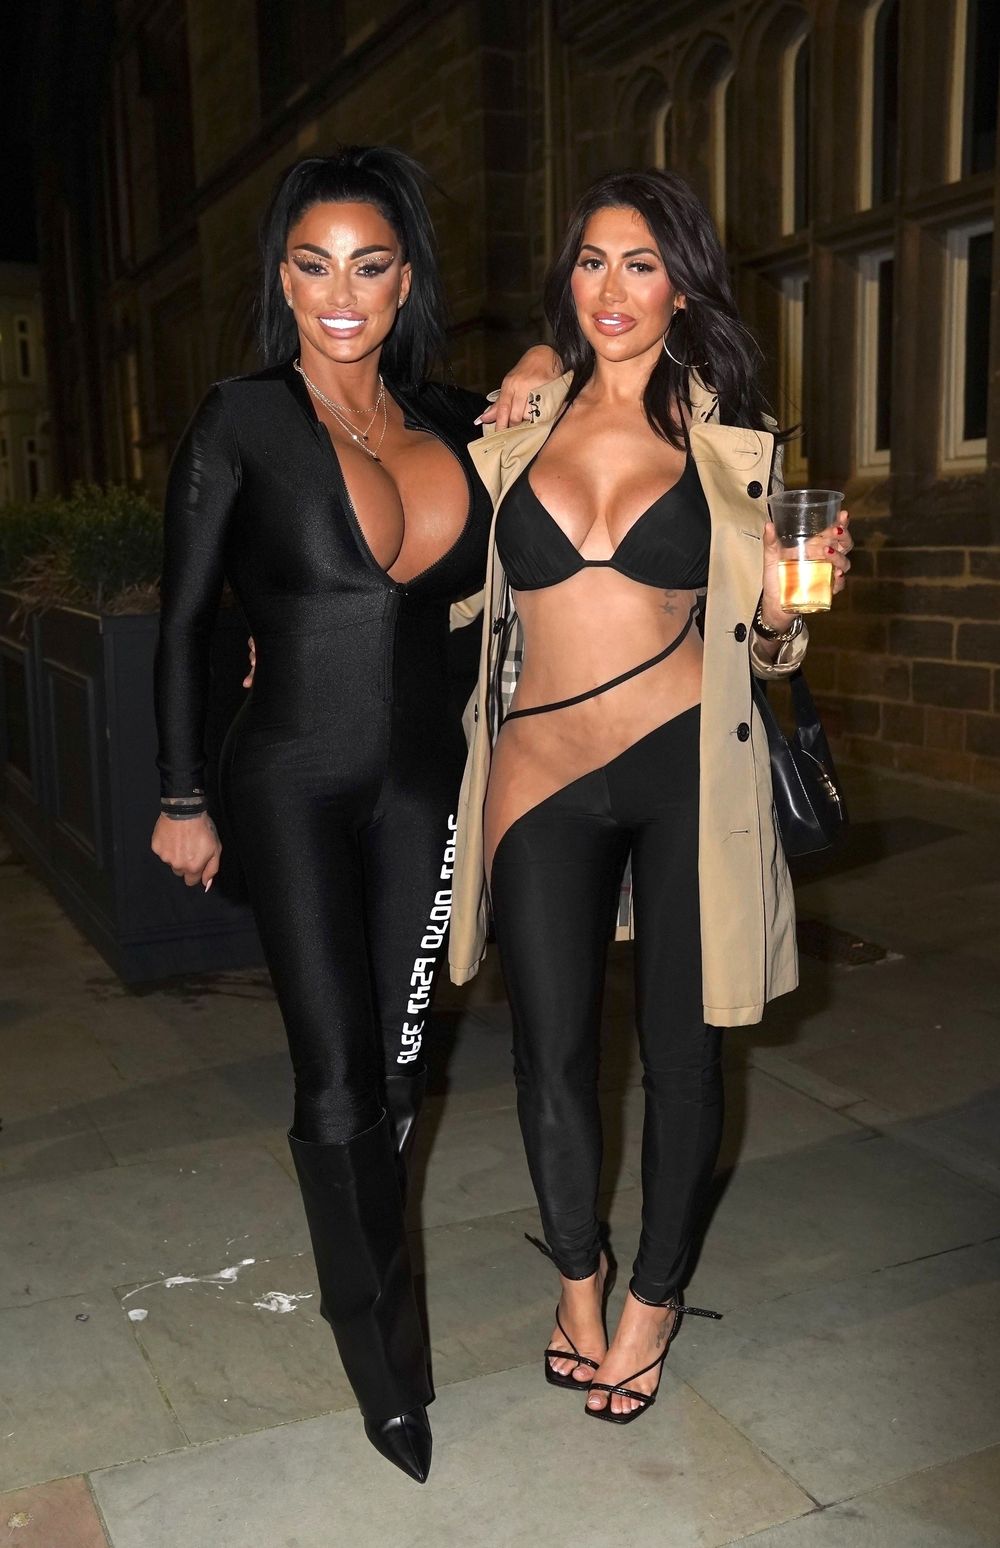 Katie Price and Chloe Ferry boobs